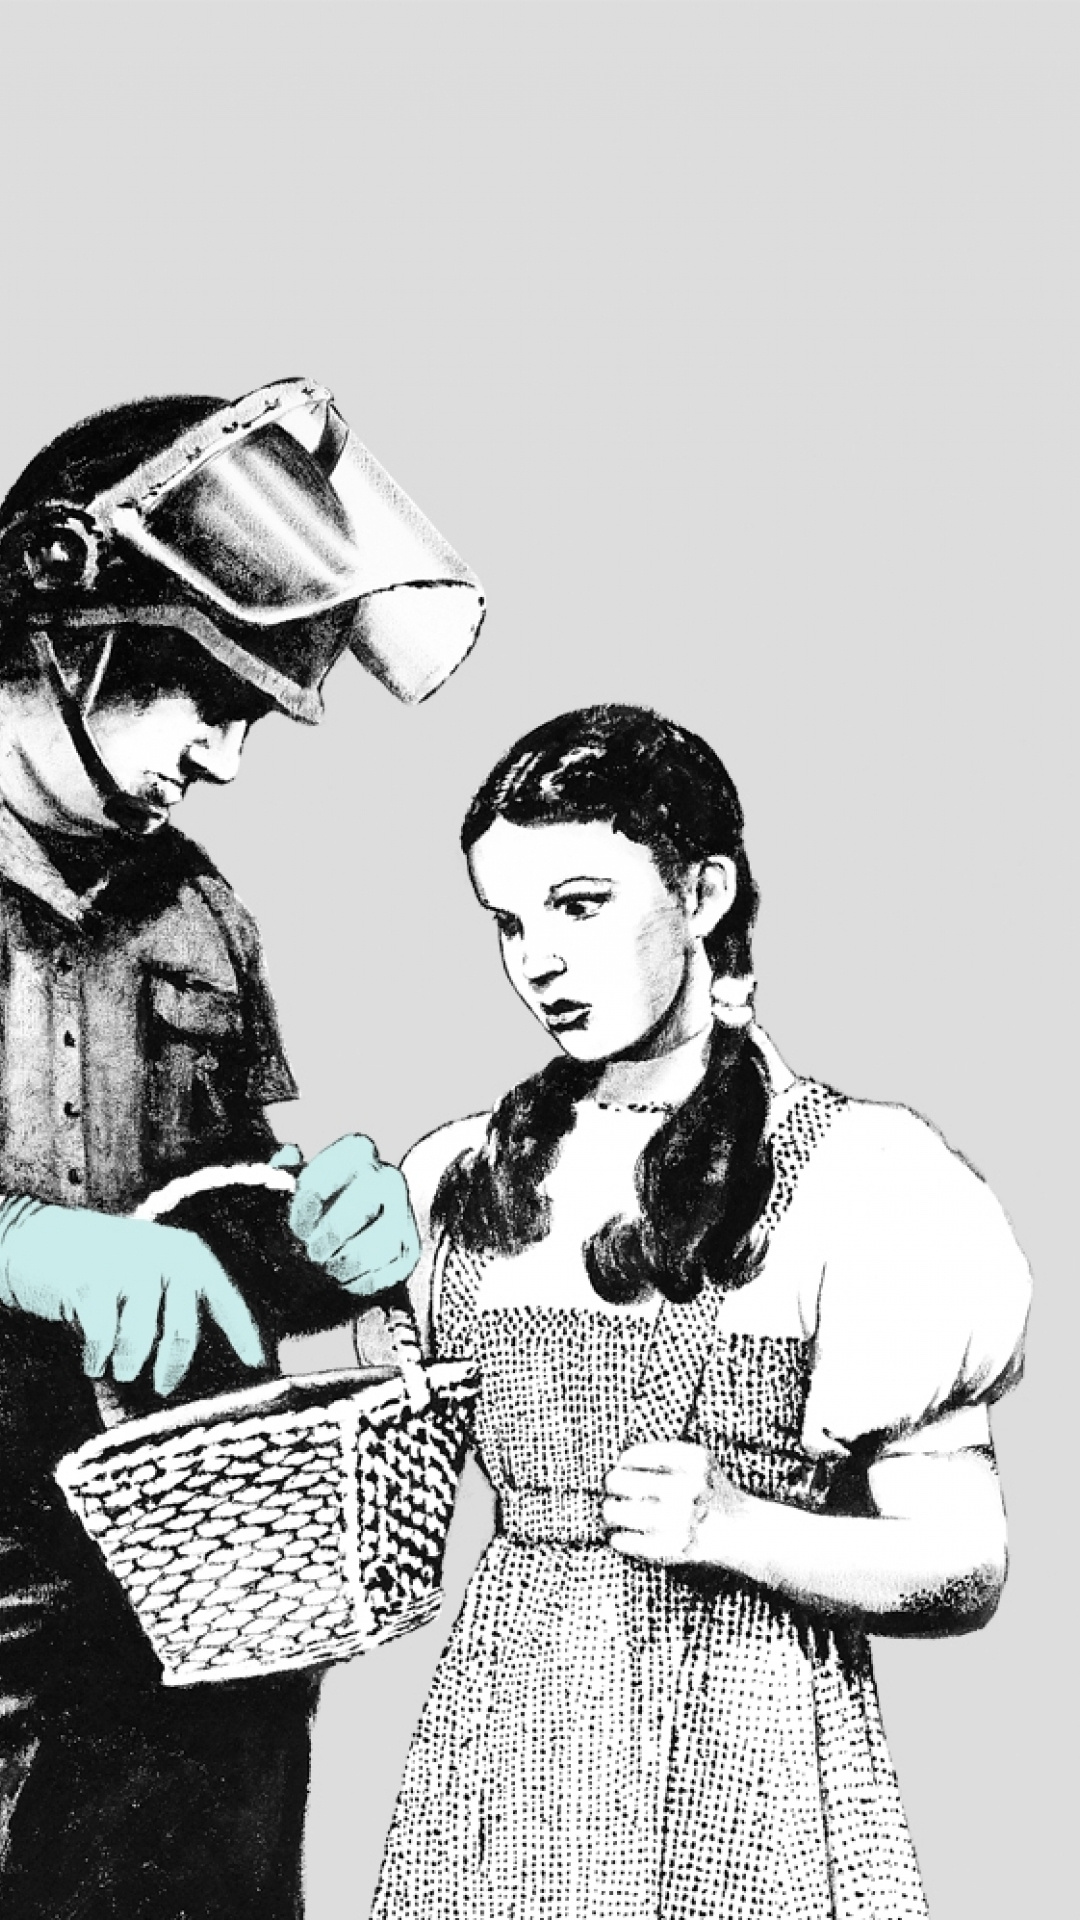 Banksy: Stop and Search, Monochrome, A storyline with Dorothy. 1080x1920 Full HD Wallpaper.